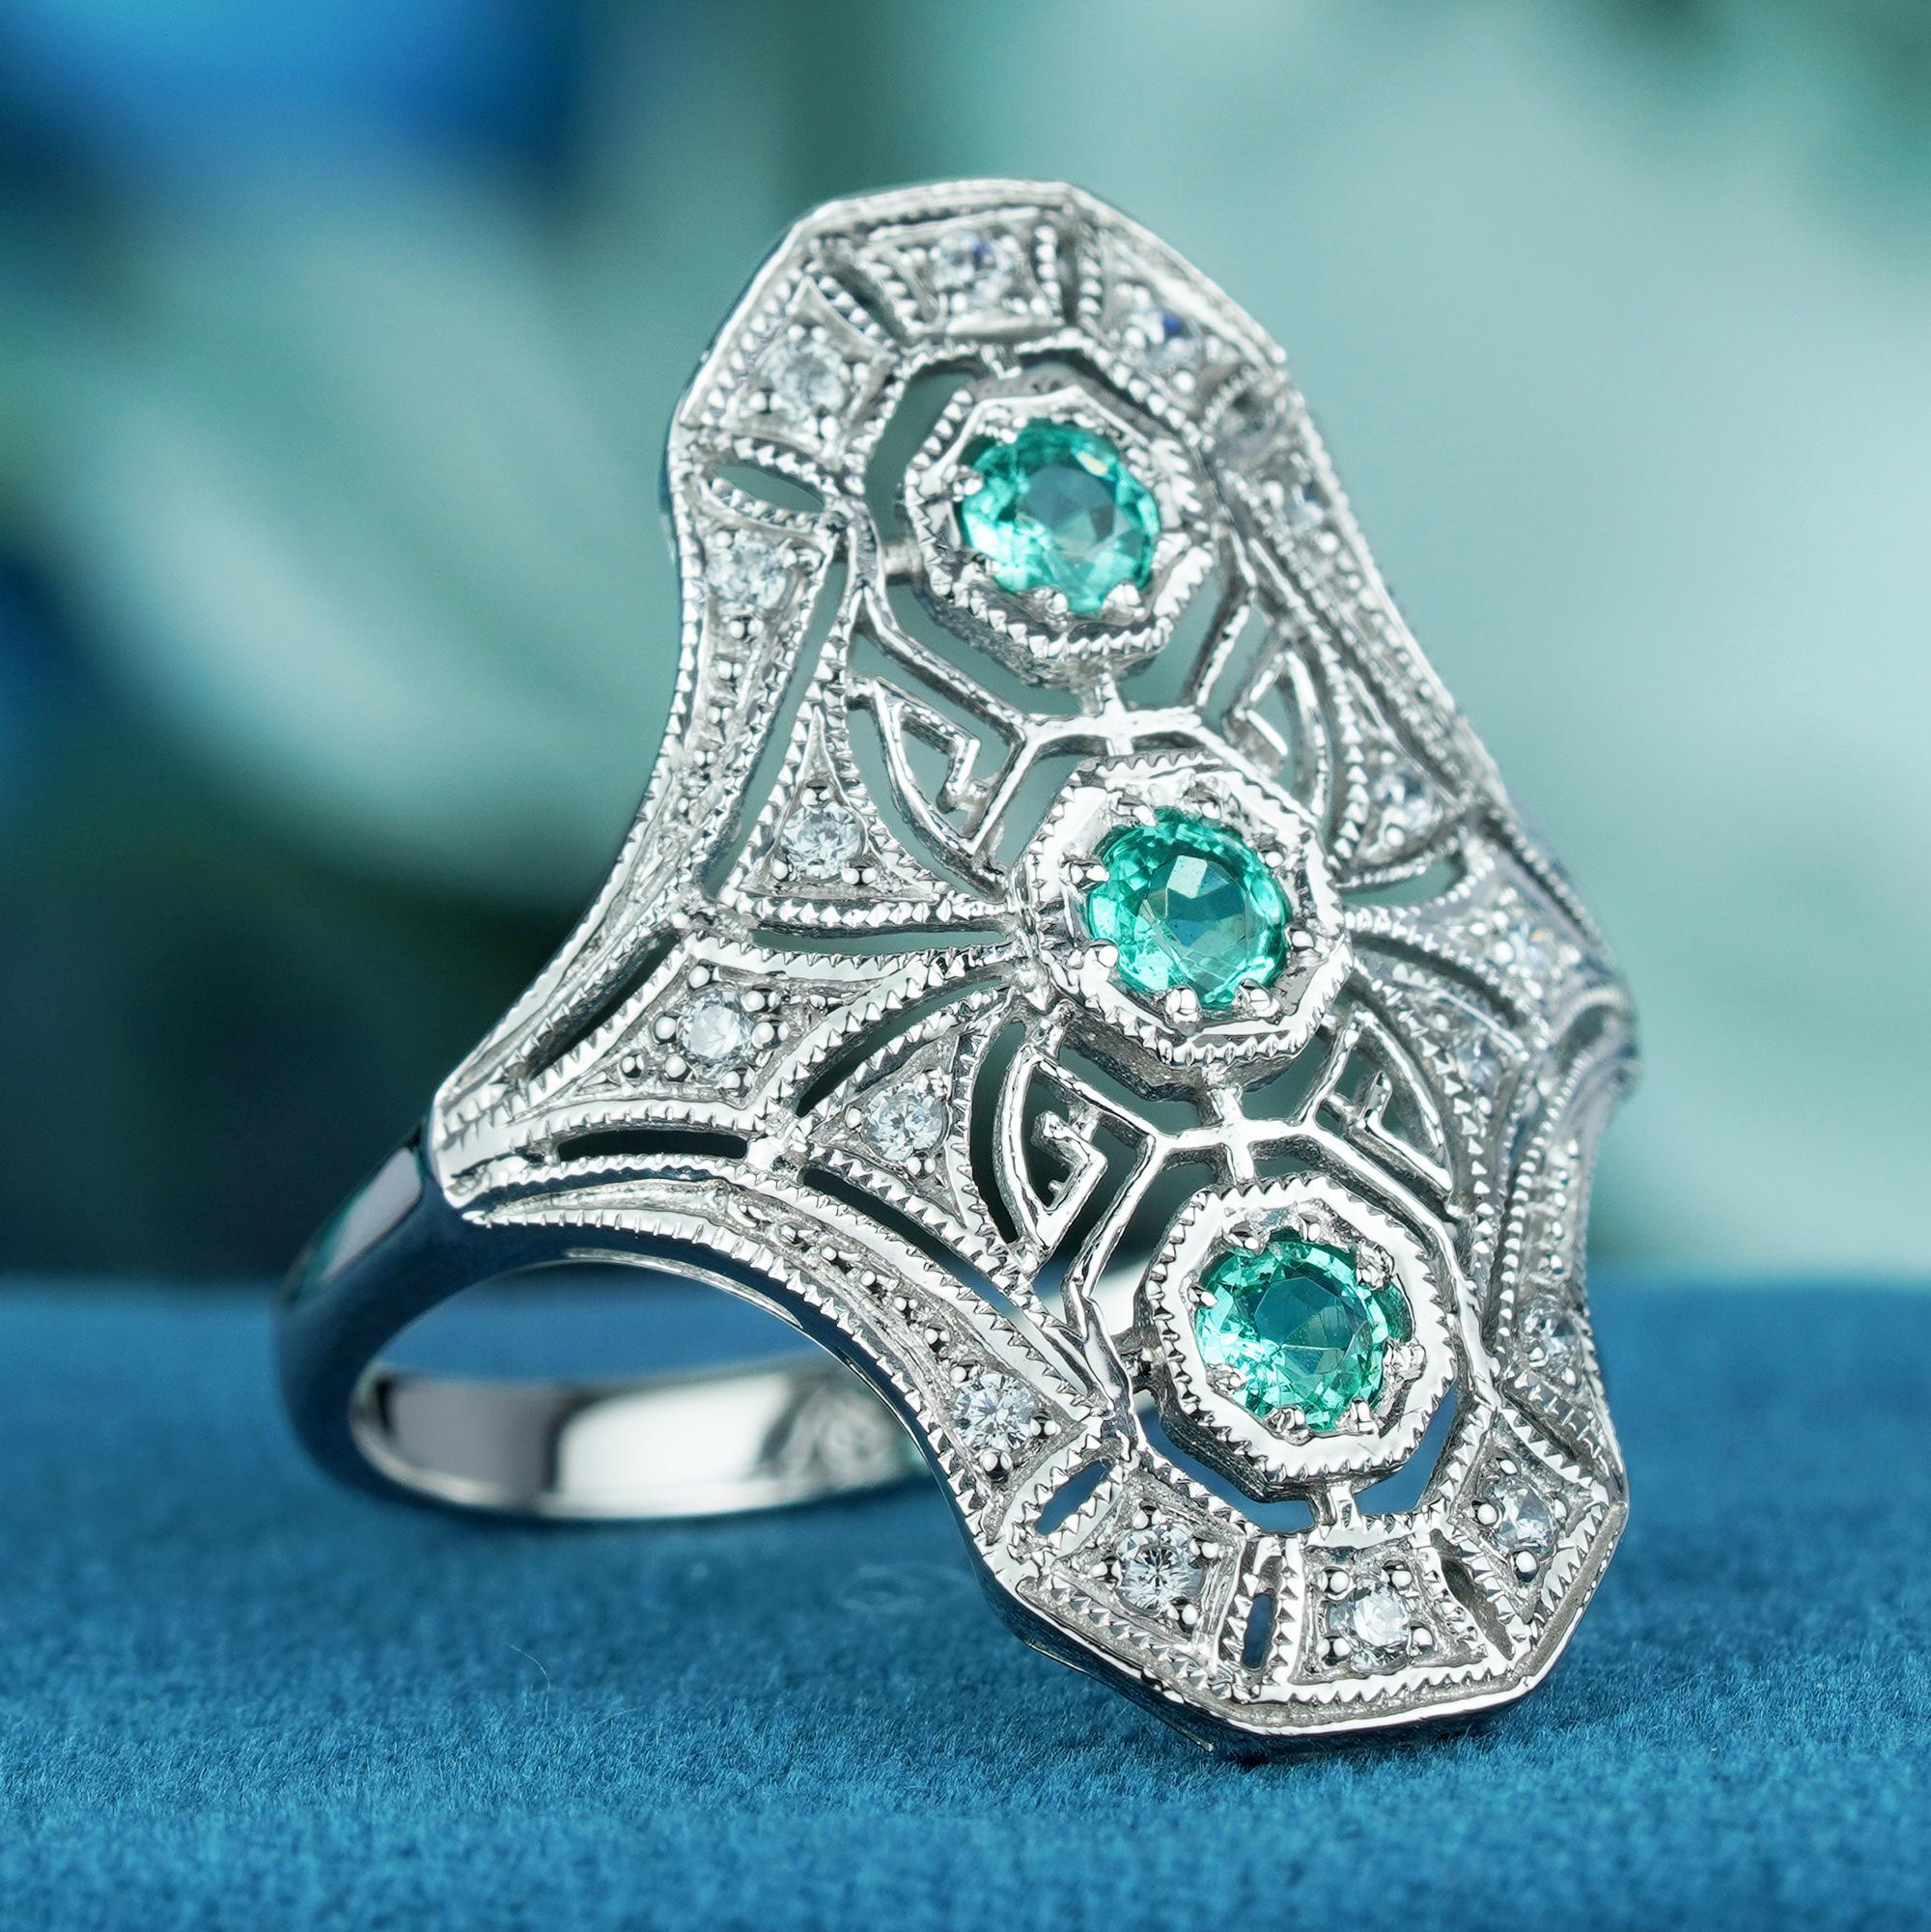 For Sale:  Natural Emerald Diamond Art Deco Style Dinner Ring in Solid 9K White Gold 3